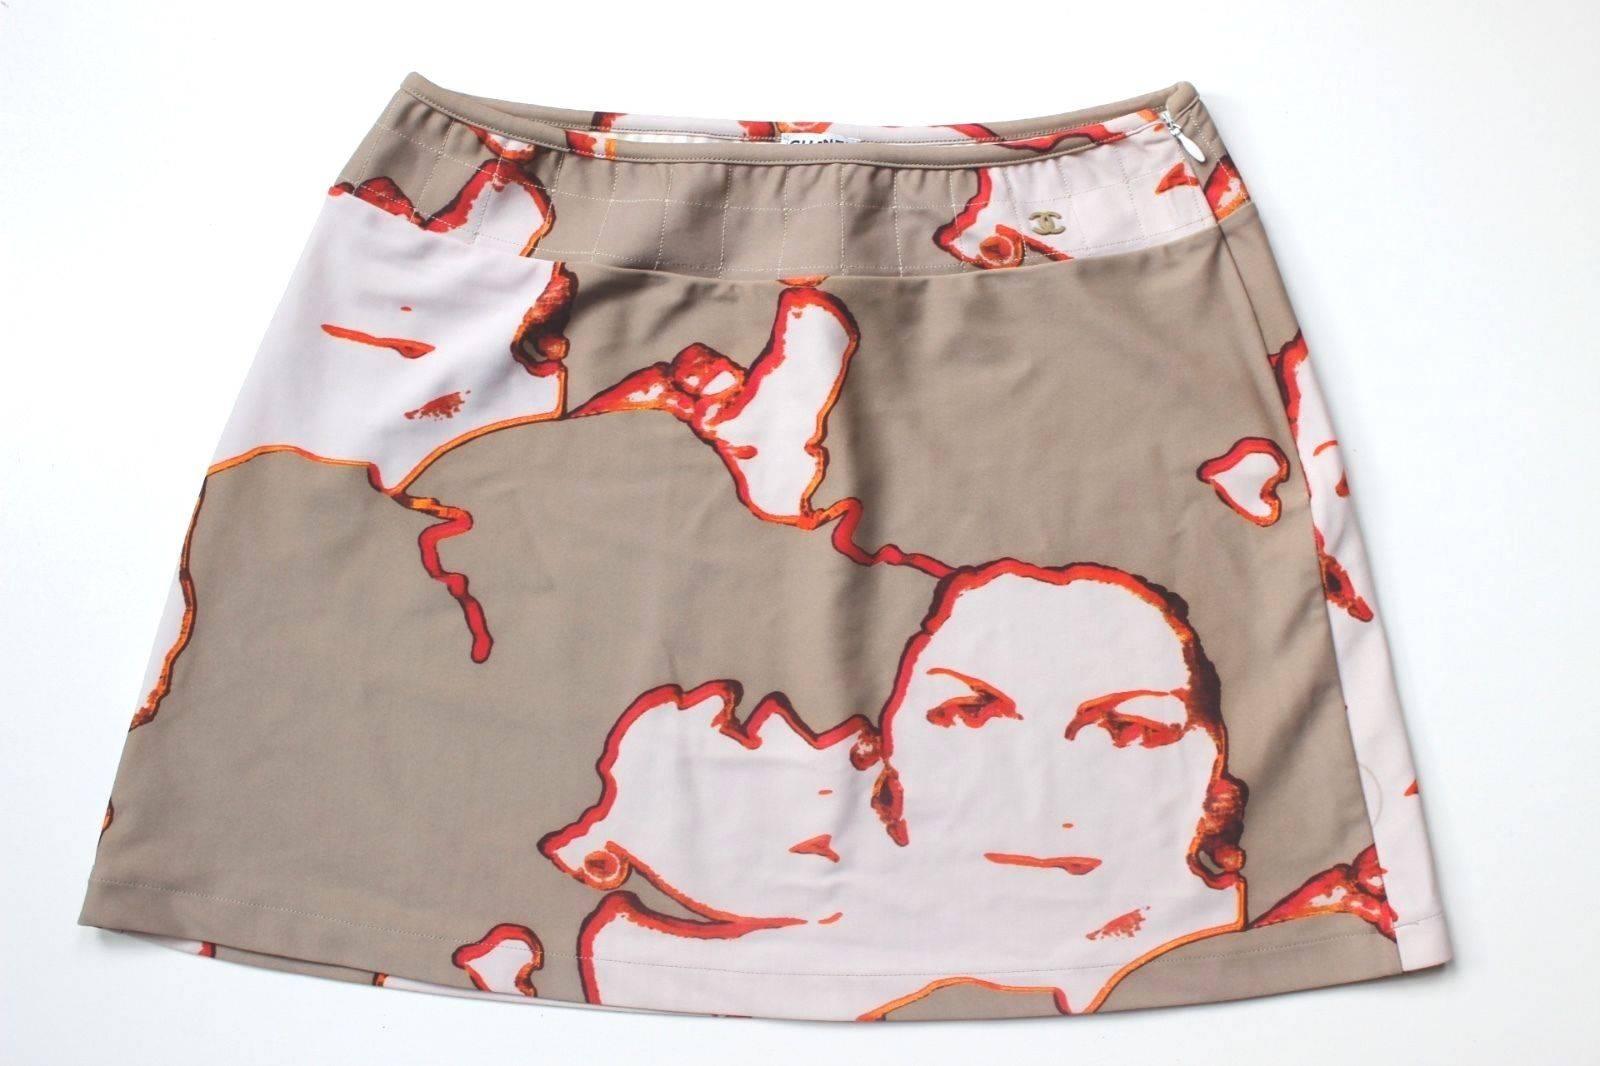 Coco Chanel Gabrielle Face Print Quilted Skirt 38 uk 10 
Amazing printed skirt with quilted trim 
Made from swim-ware fabric, can be worn in or out the pool 
Excellent condition 
Full length 14 inches, waist 13.5 inches across, hips 19 inches across